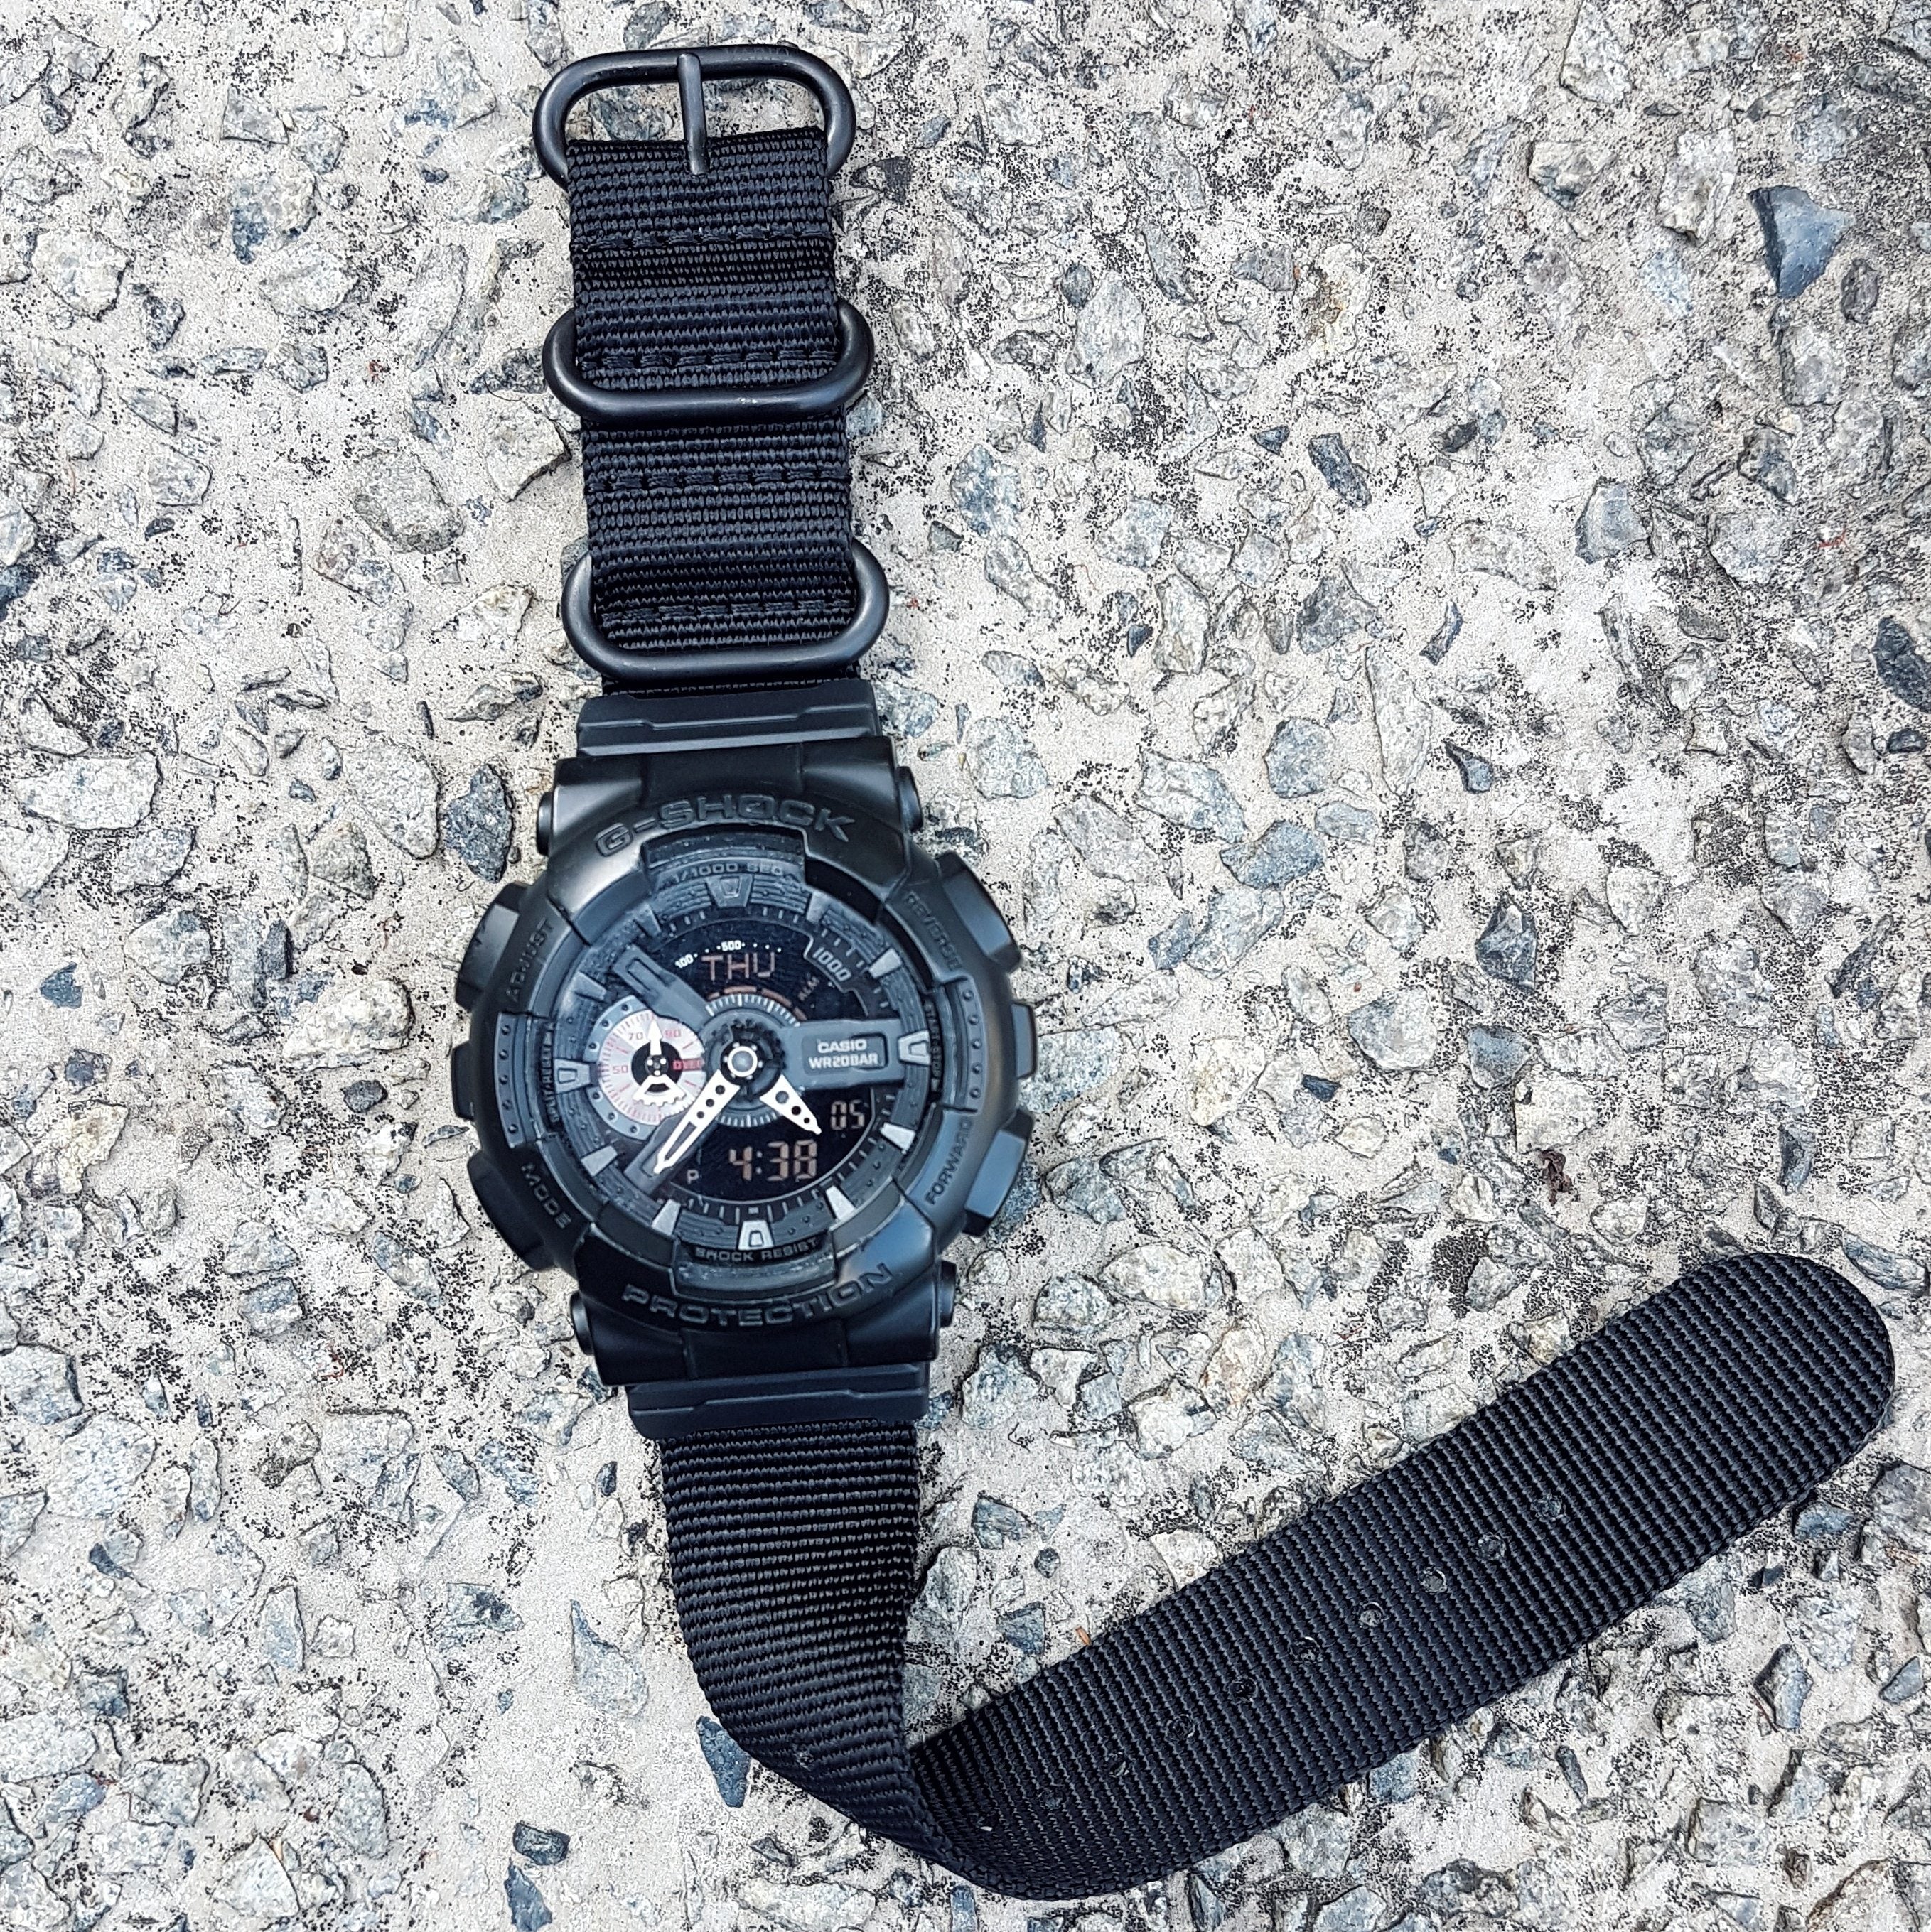 G-Shock Watch with Vario Ballistic Nylon strap and Adapter